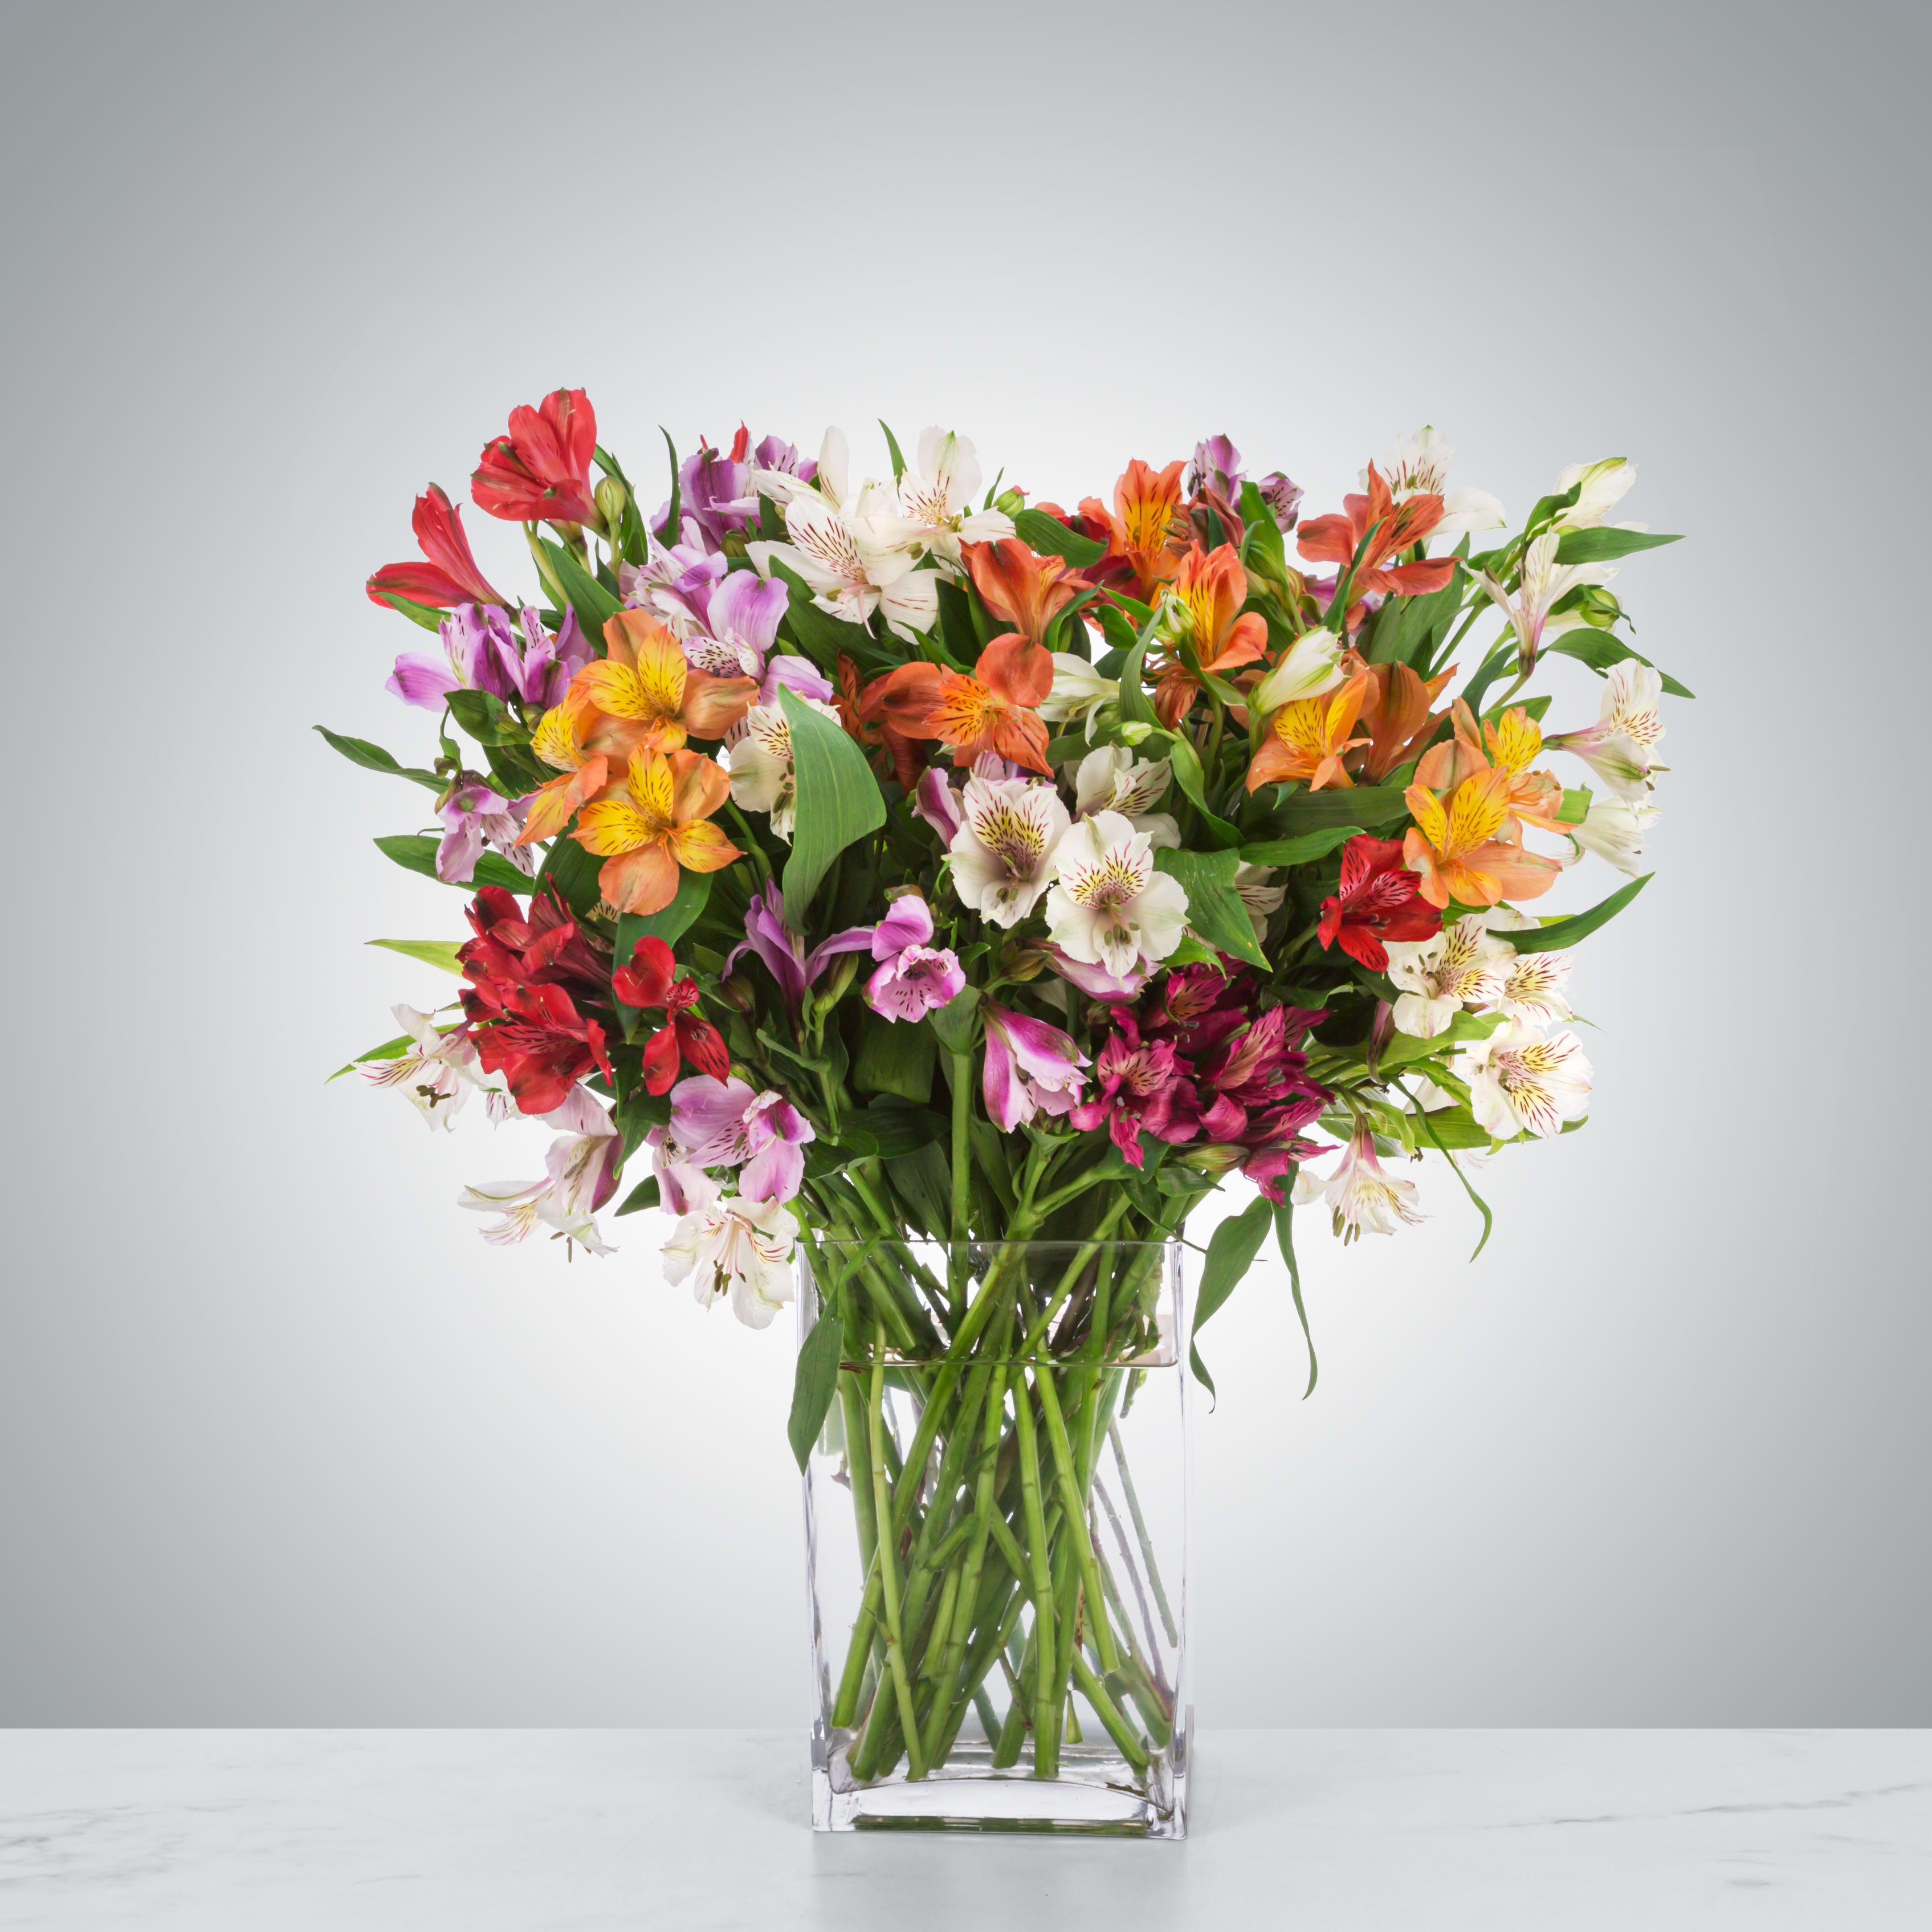 Amazing Alstroemeria by BloomNation™ - Alstroemeria often represents mutual support. This makes the arrangement the perfect choice for saying thank you or showing appreciation. Send this to your best friend, your family, or your coworker who always has your back.  1st Image: Standard 2nd Image: Premium